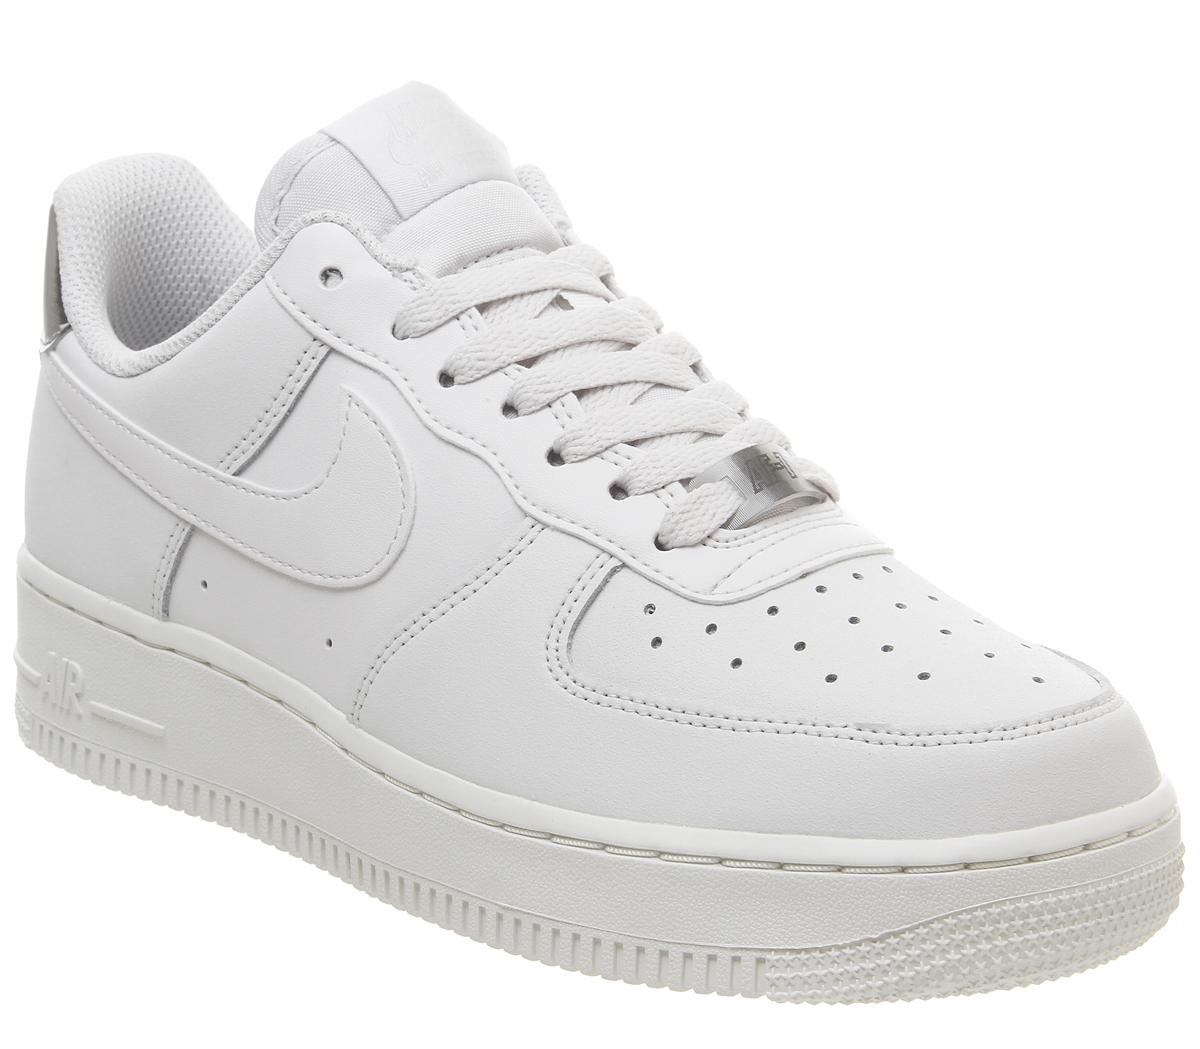 Nike Air Force 1 07 Trainers Platinum 